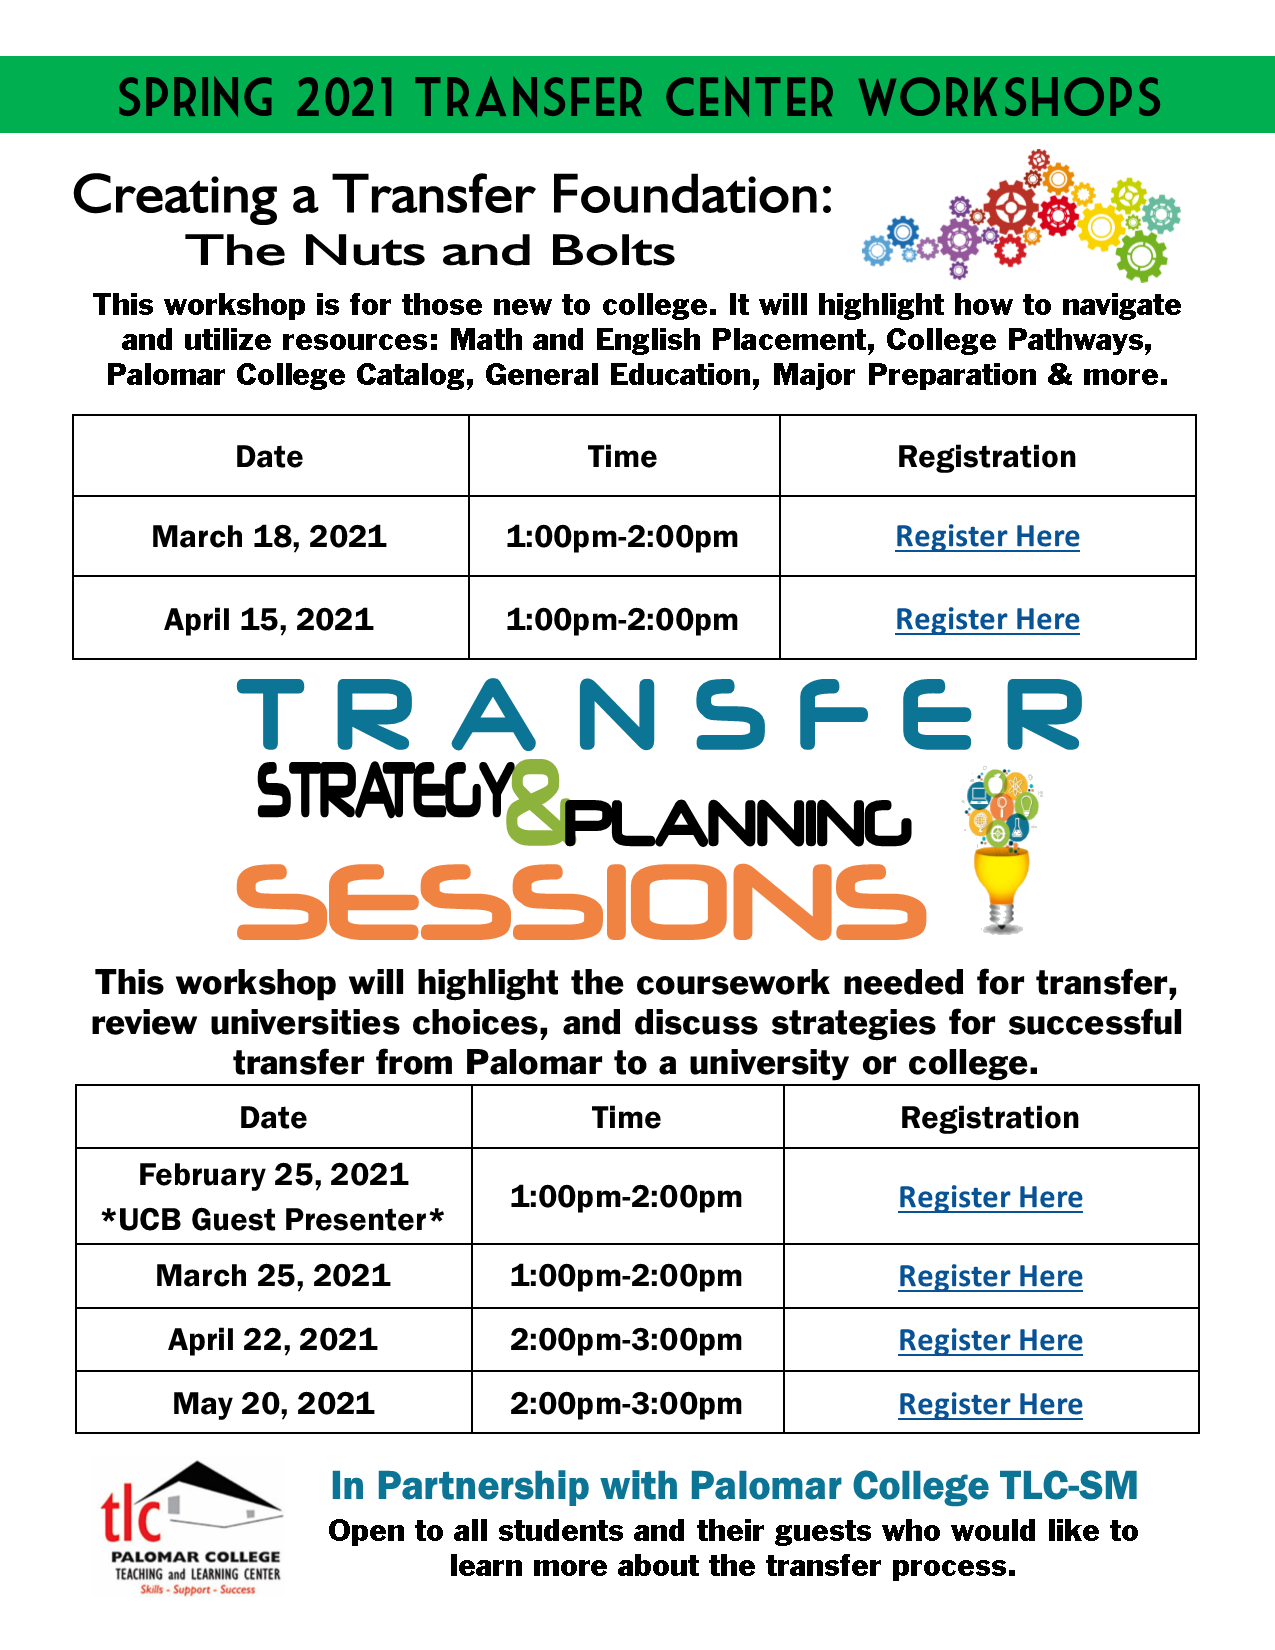 Creating a Transfer Foundation: The Nuts and Bolts Workshop Flyer